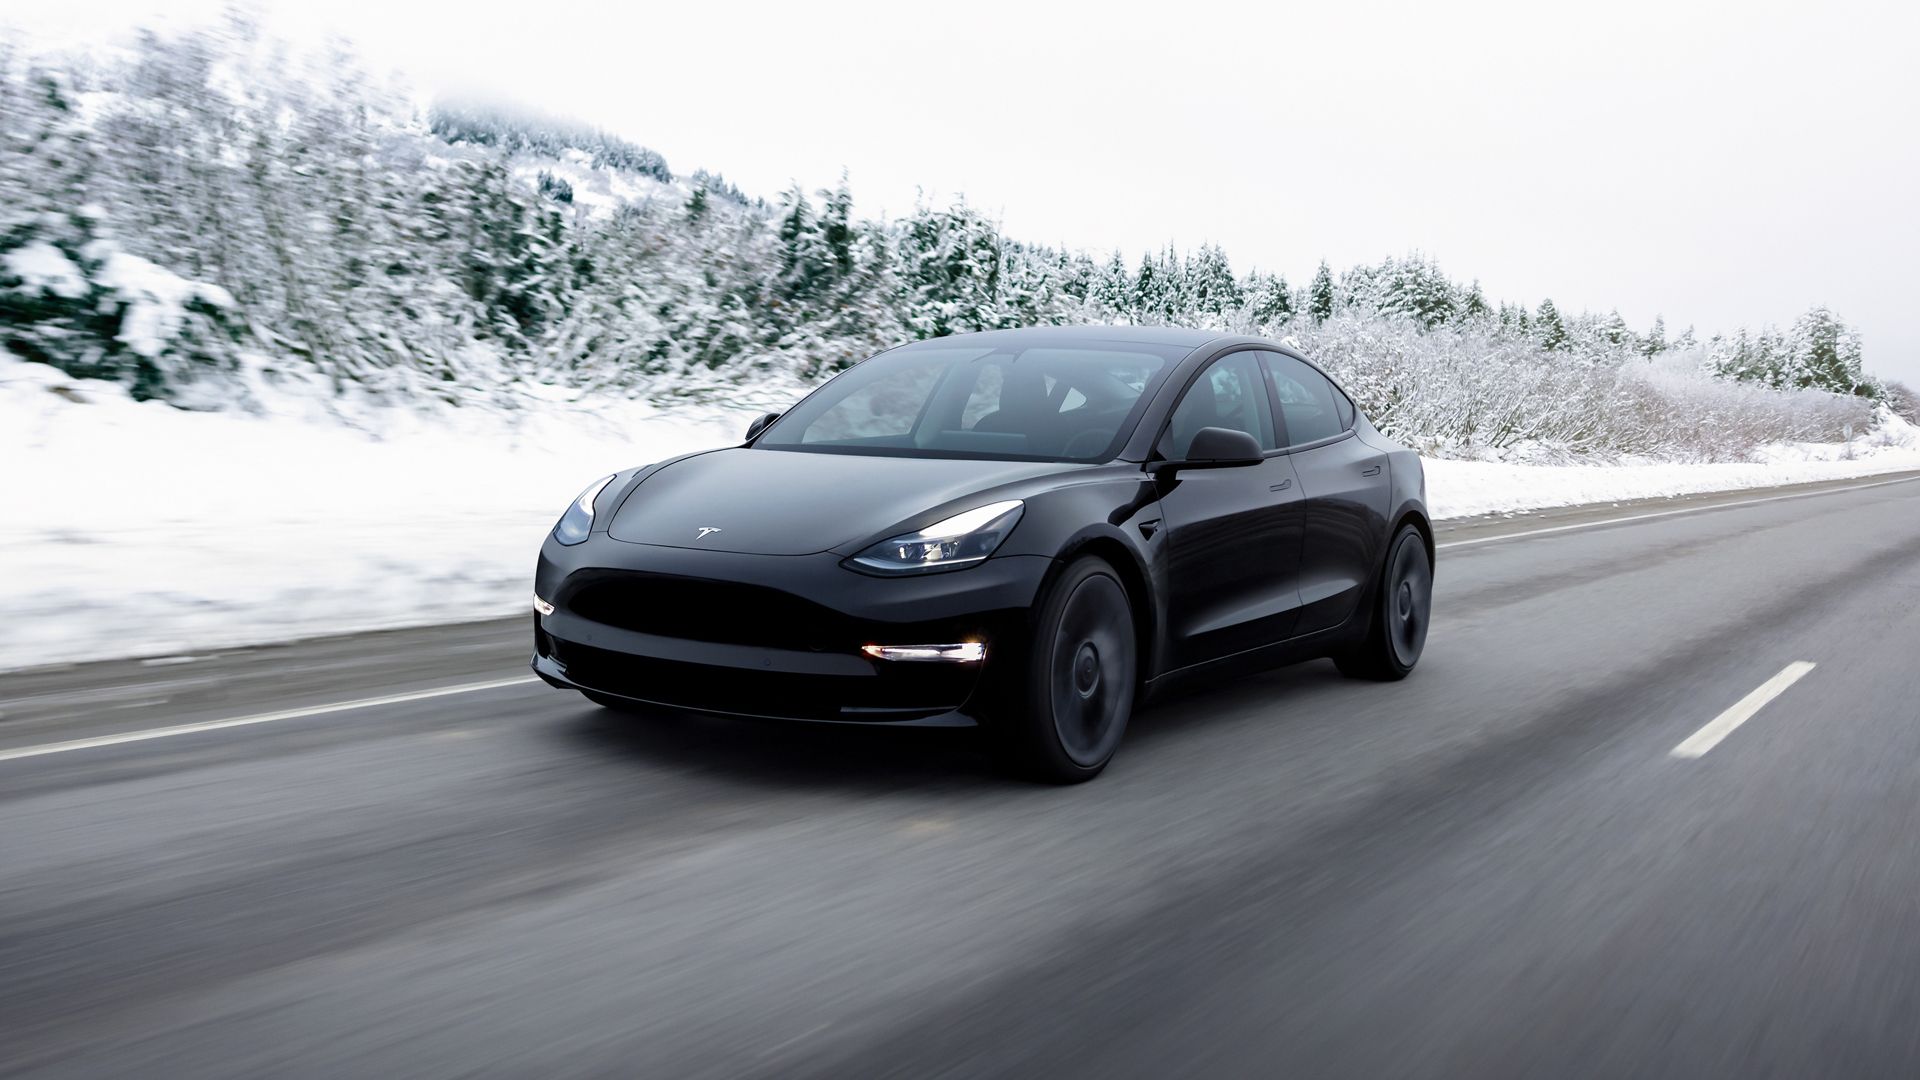 do-you-want-a-brand-new-tesla-model-3-for-27-000-move-to-oregon